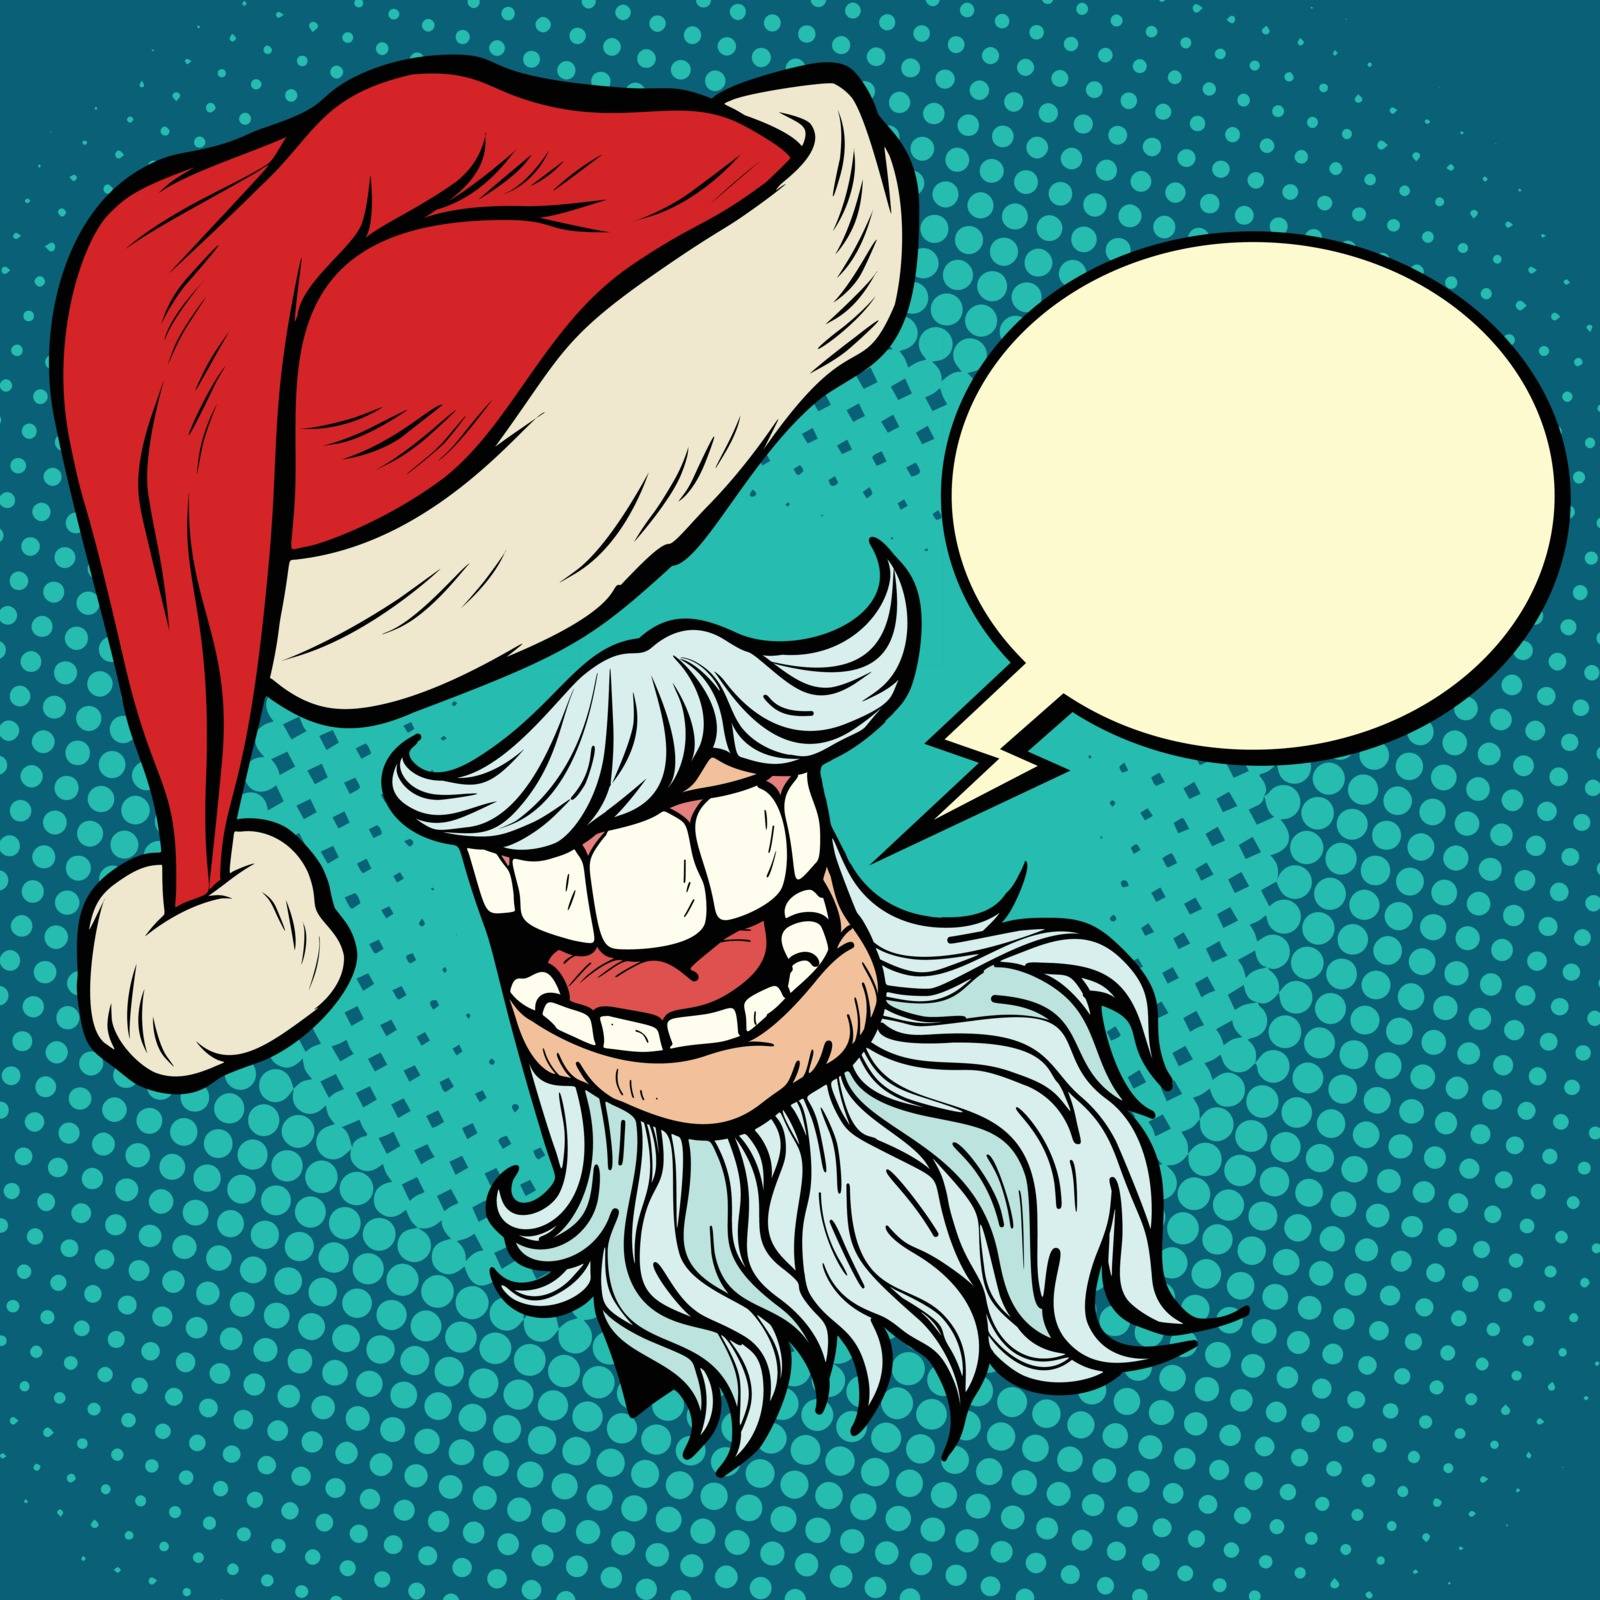 Santa Claus beard and hat by rogistok